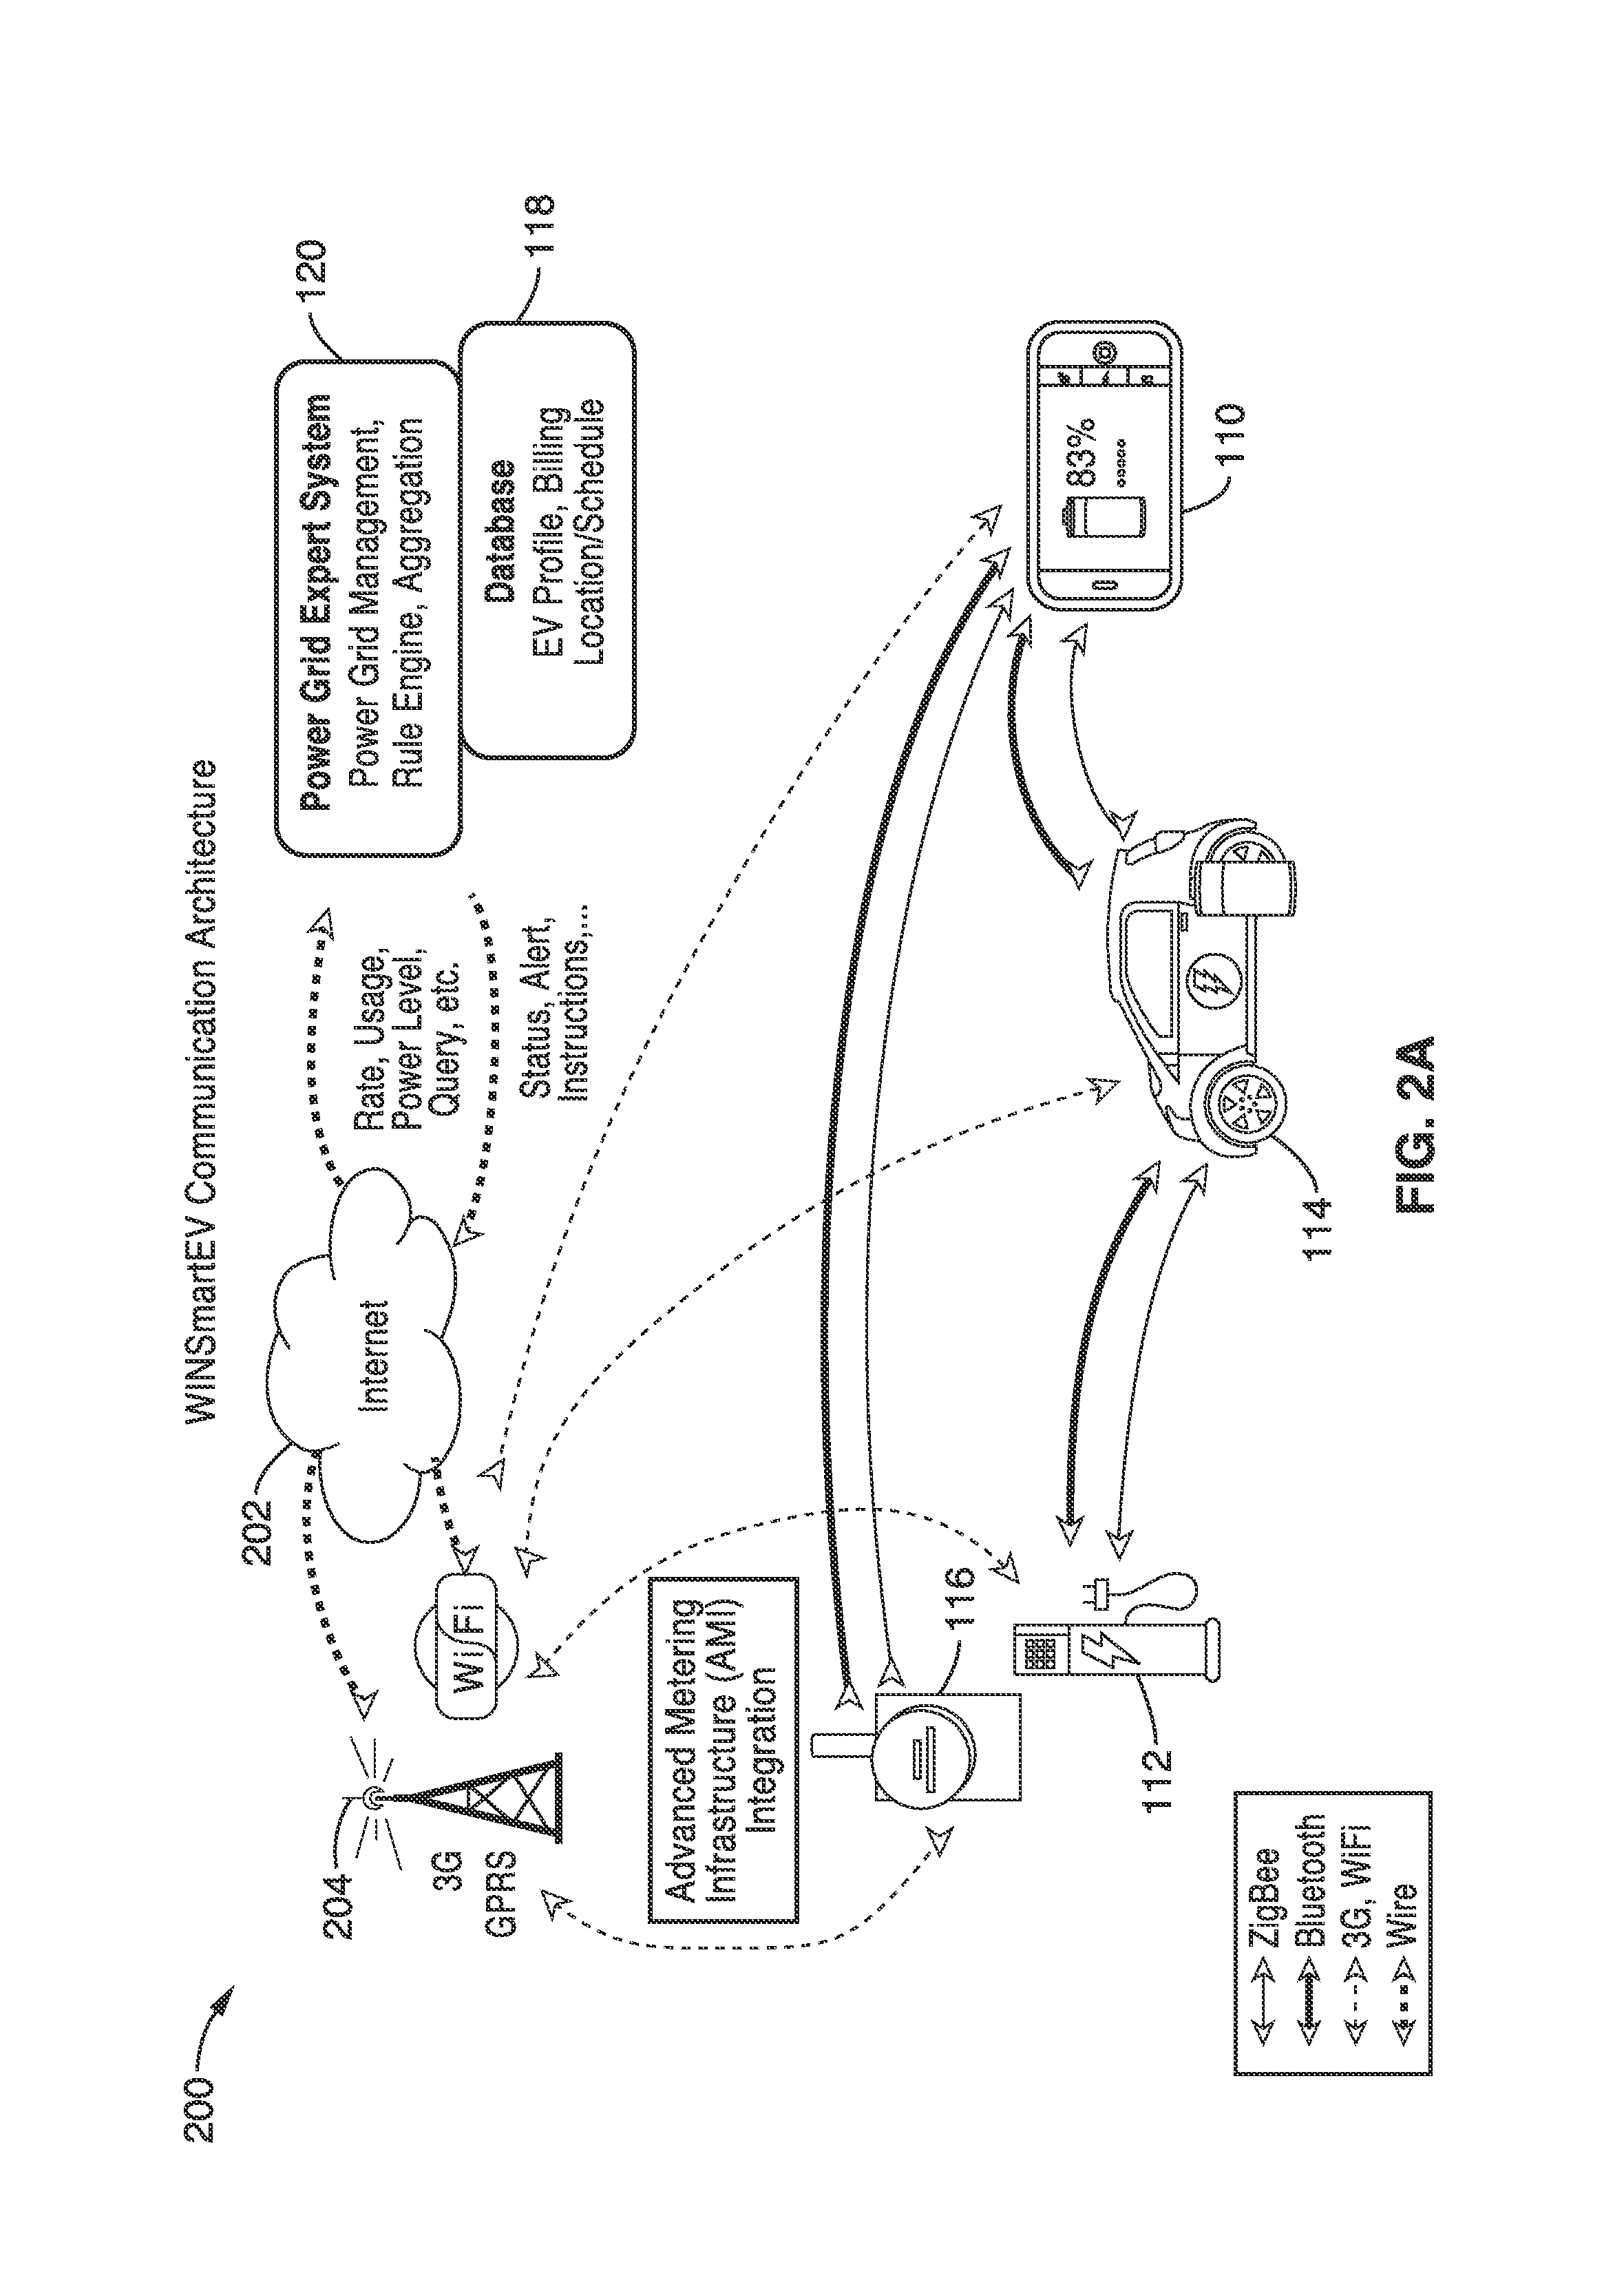 Smart electric vehicle (EV) charging and grid integration apparatus and methods